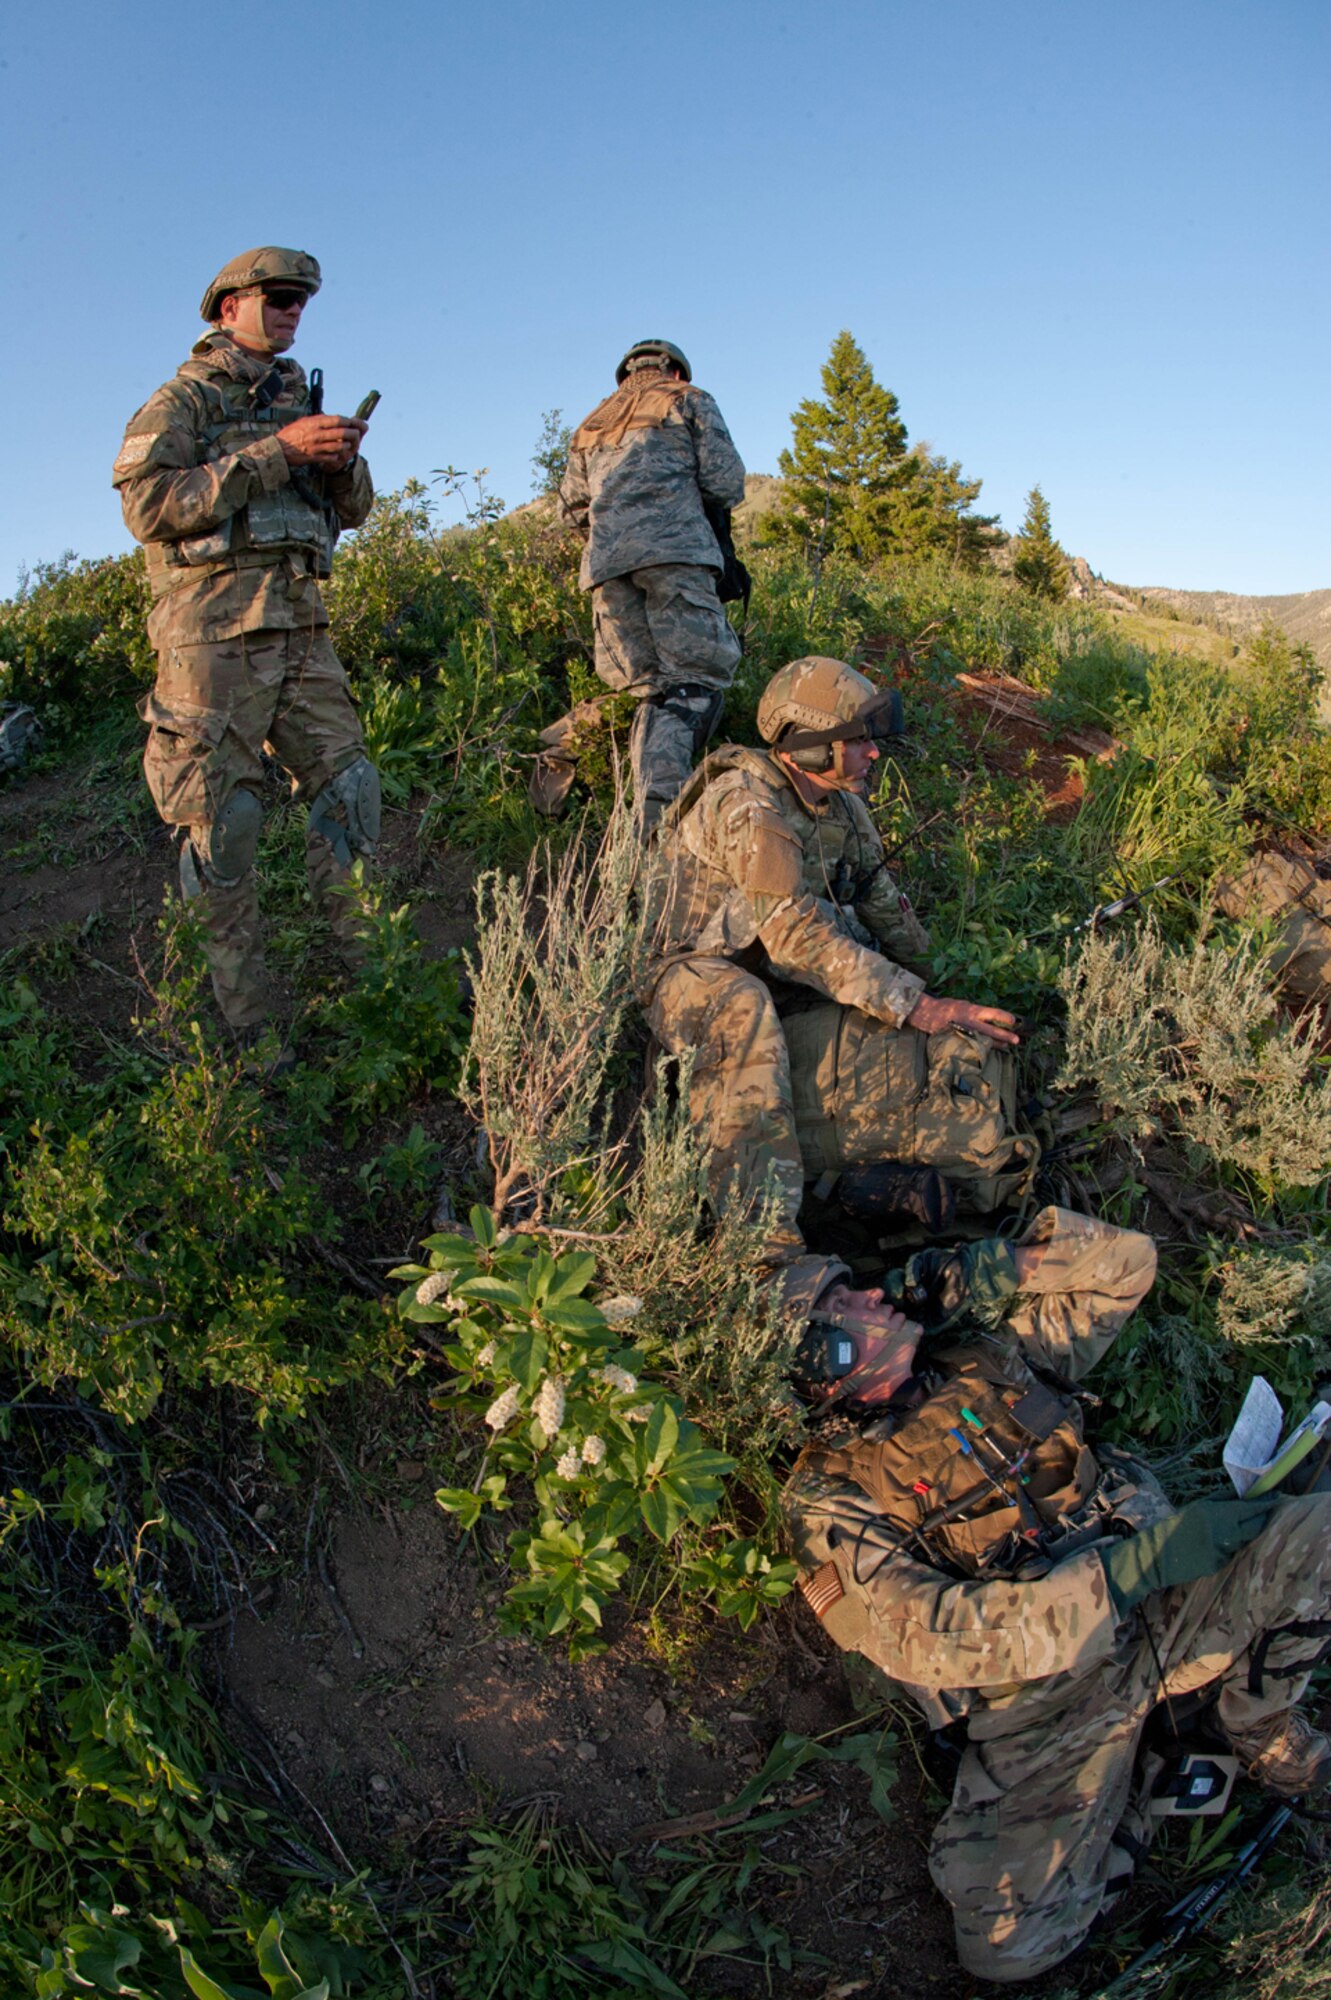 Members of the 124th Air Support Operations Squadron (ASOS) of the Idaho Air National Guard participate in intensive outdoor training during exercise Mountain Fury II throughout the Idaho Sawtooth National Forest, June 25. Members of ASOS perform small unit tactics, mounted patrol with HMWVVs, Close Air Support missions, and over watch with the help of the 190th Fighter Squadron’s A-10 Aircraft and B Company, 1-214th General Support Aviation Battalion (GSAB) CH-47 Chinook Helicopters, Idaho Army National Guard Apache Helicopters and 728th Air Control Squadron, Mt. Home, June 19 through June 27.